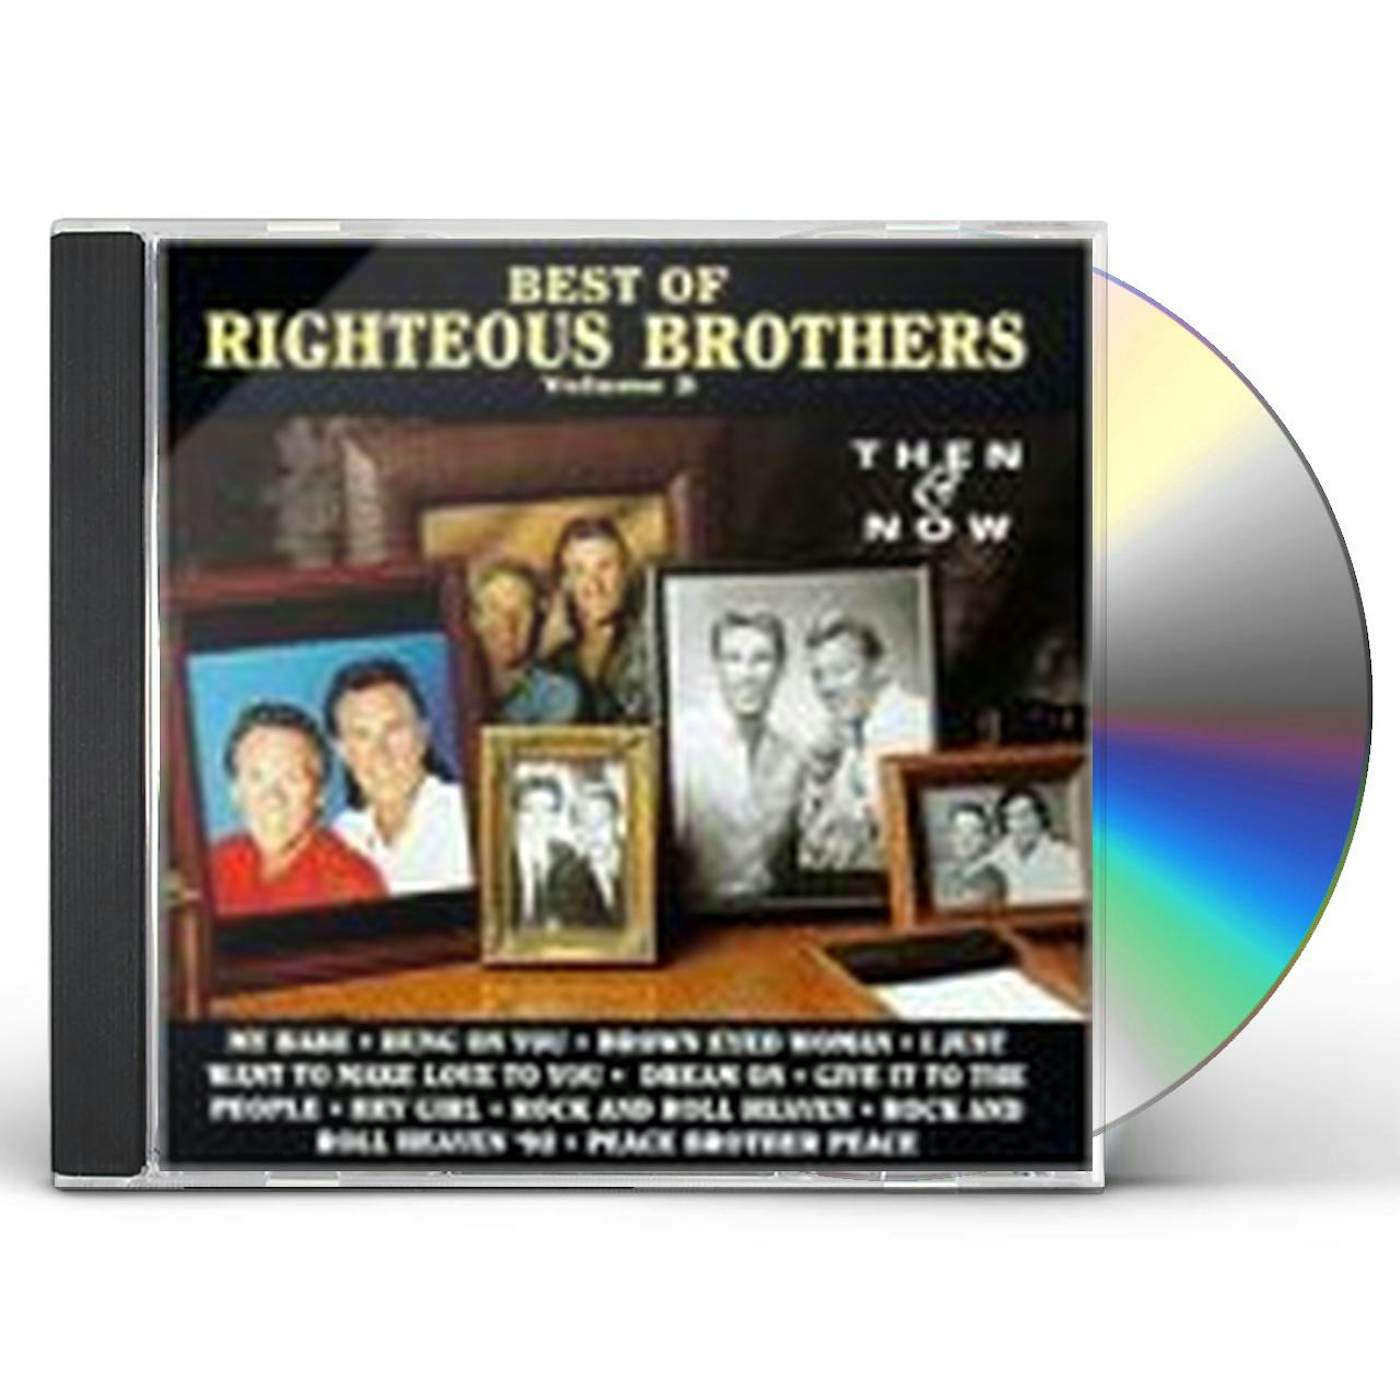 The Righteous Brothers BEST OF 2 CD